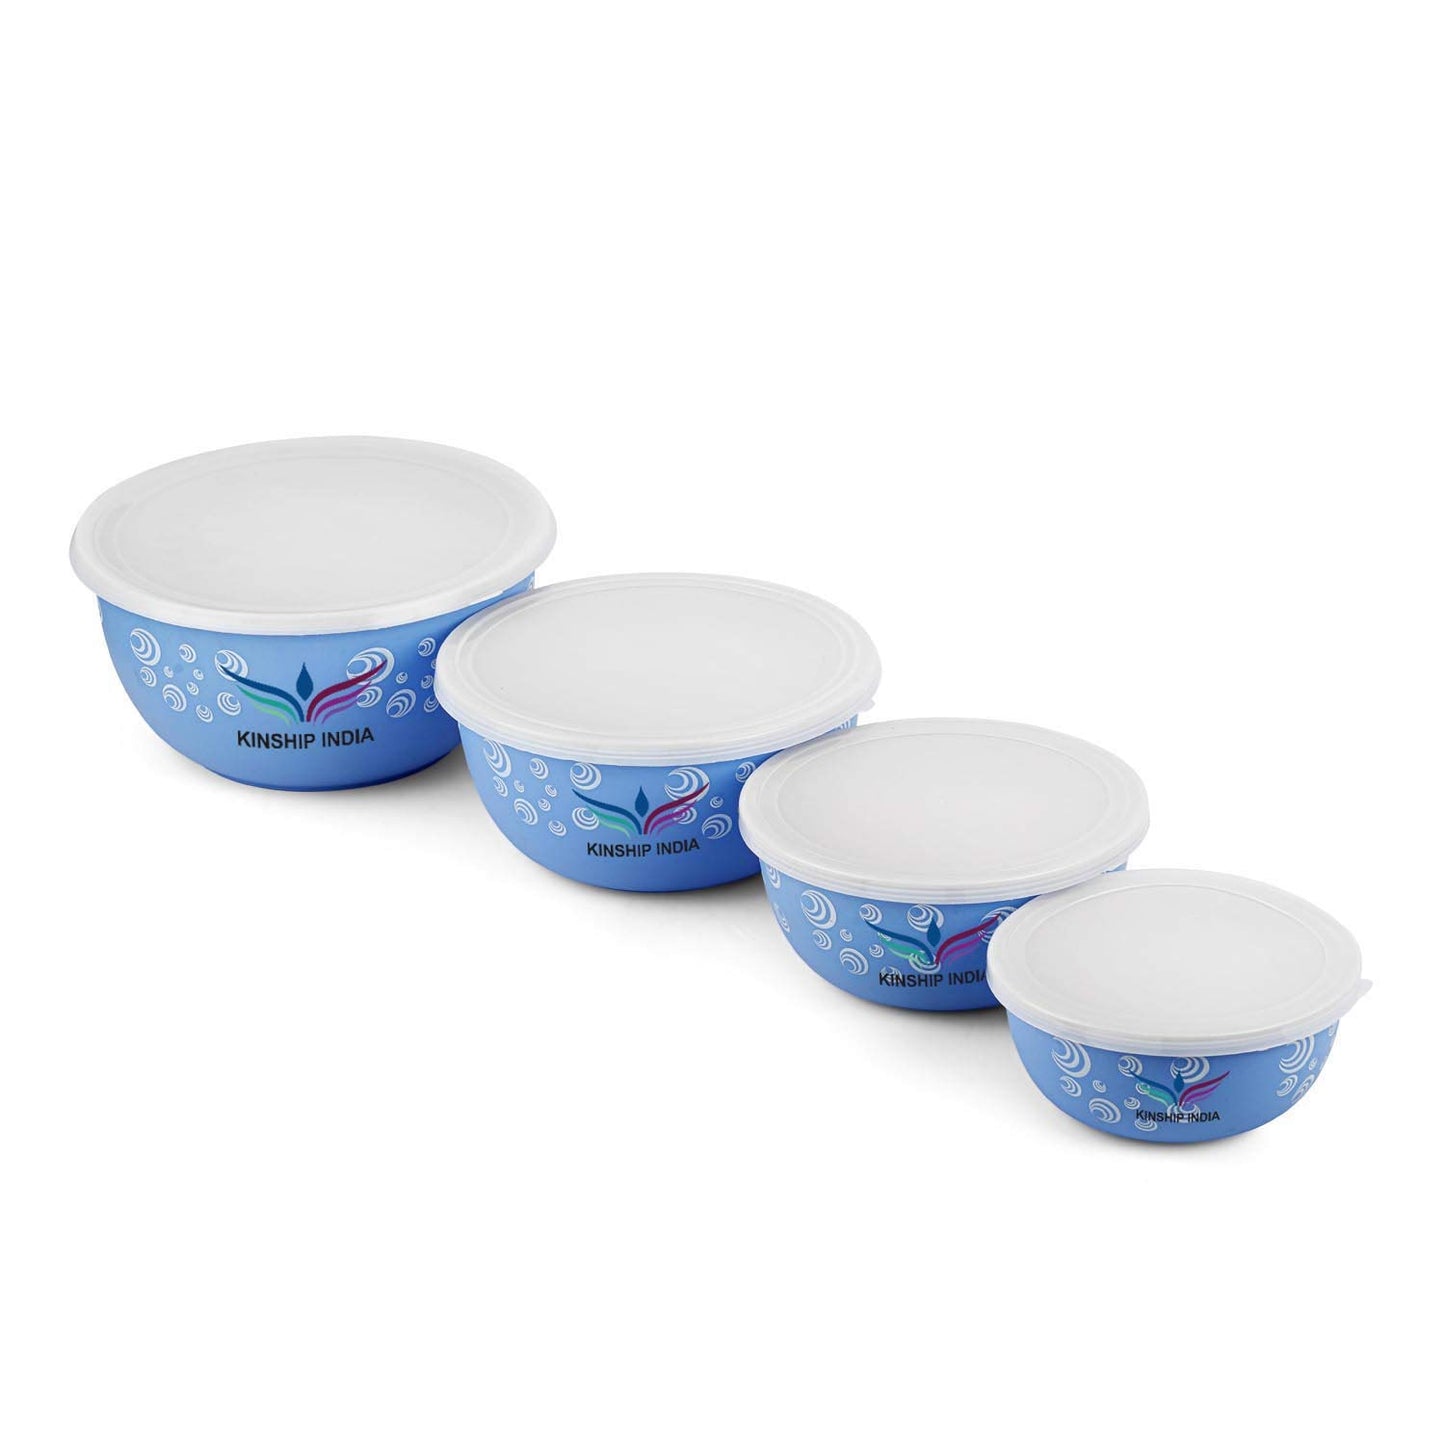 Microwave Safe Stainless Steel Plastic Coated Designer Euro Bowl (450,700,1200 and 2000ml) Set of 4 (BLUE)